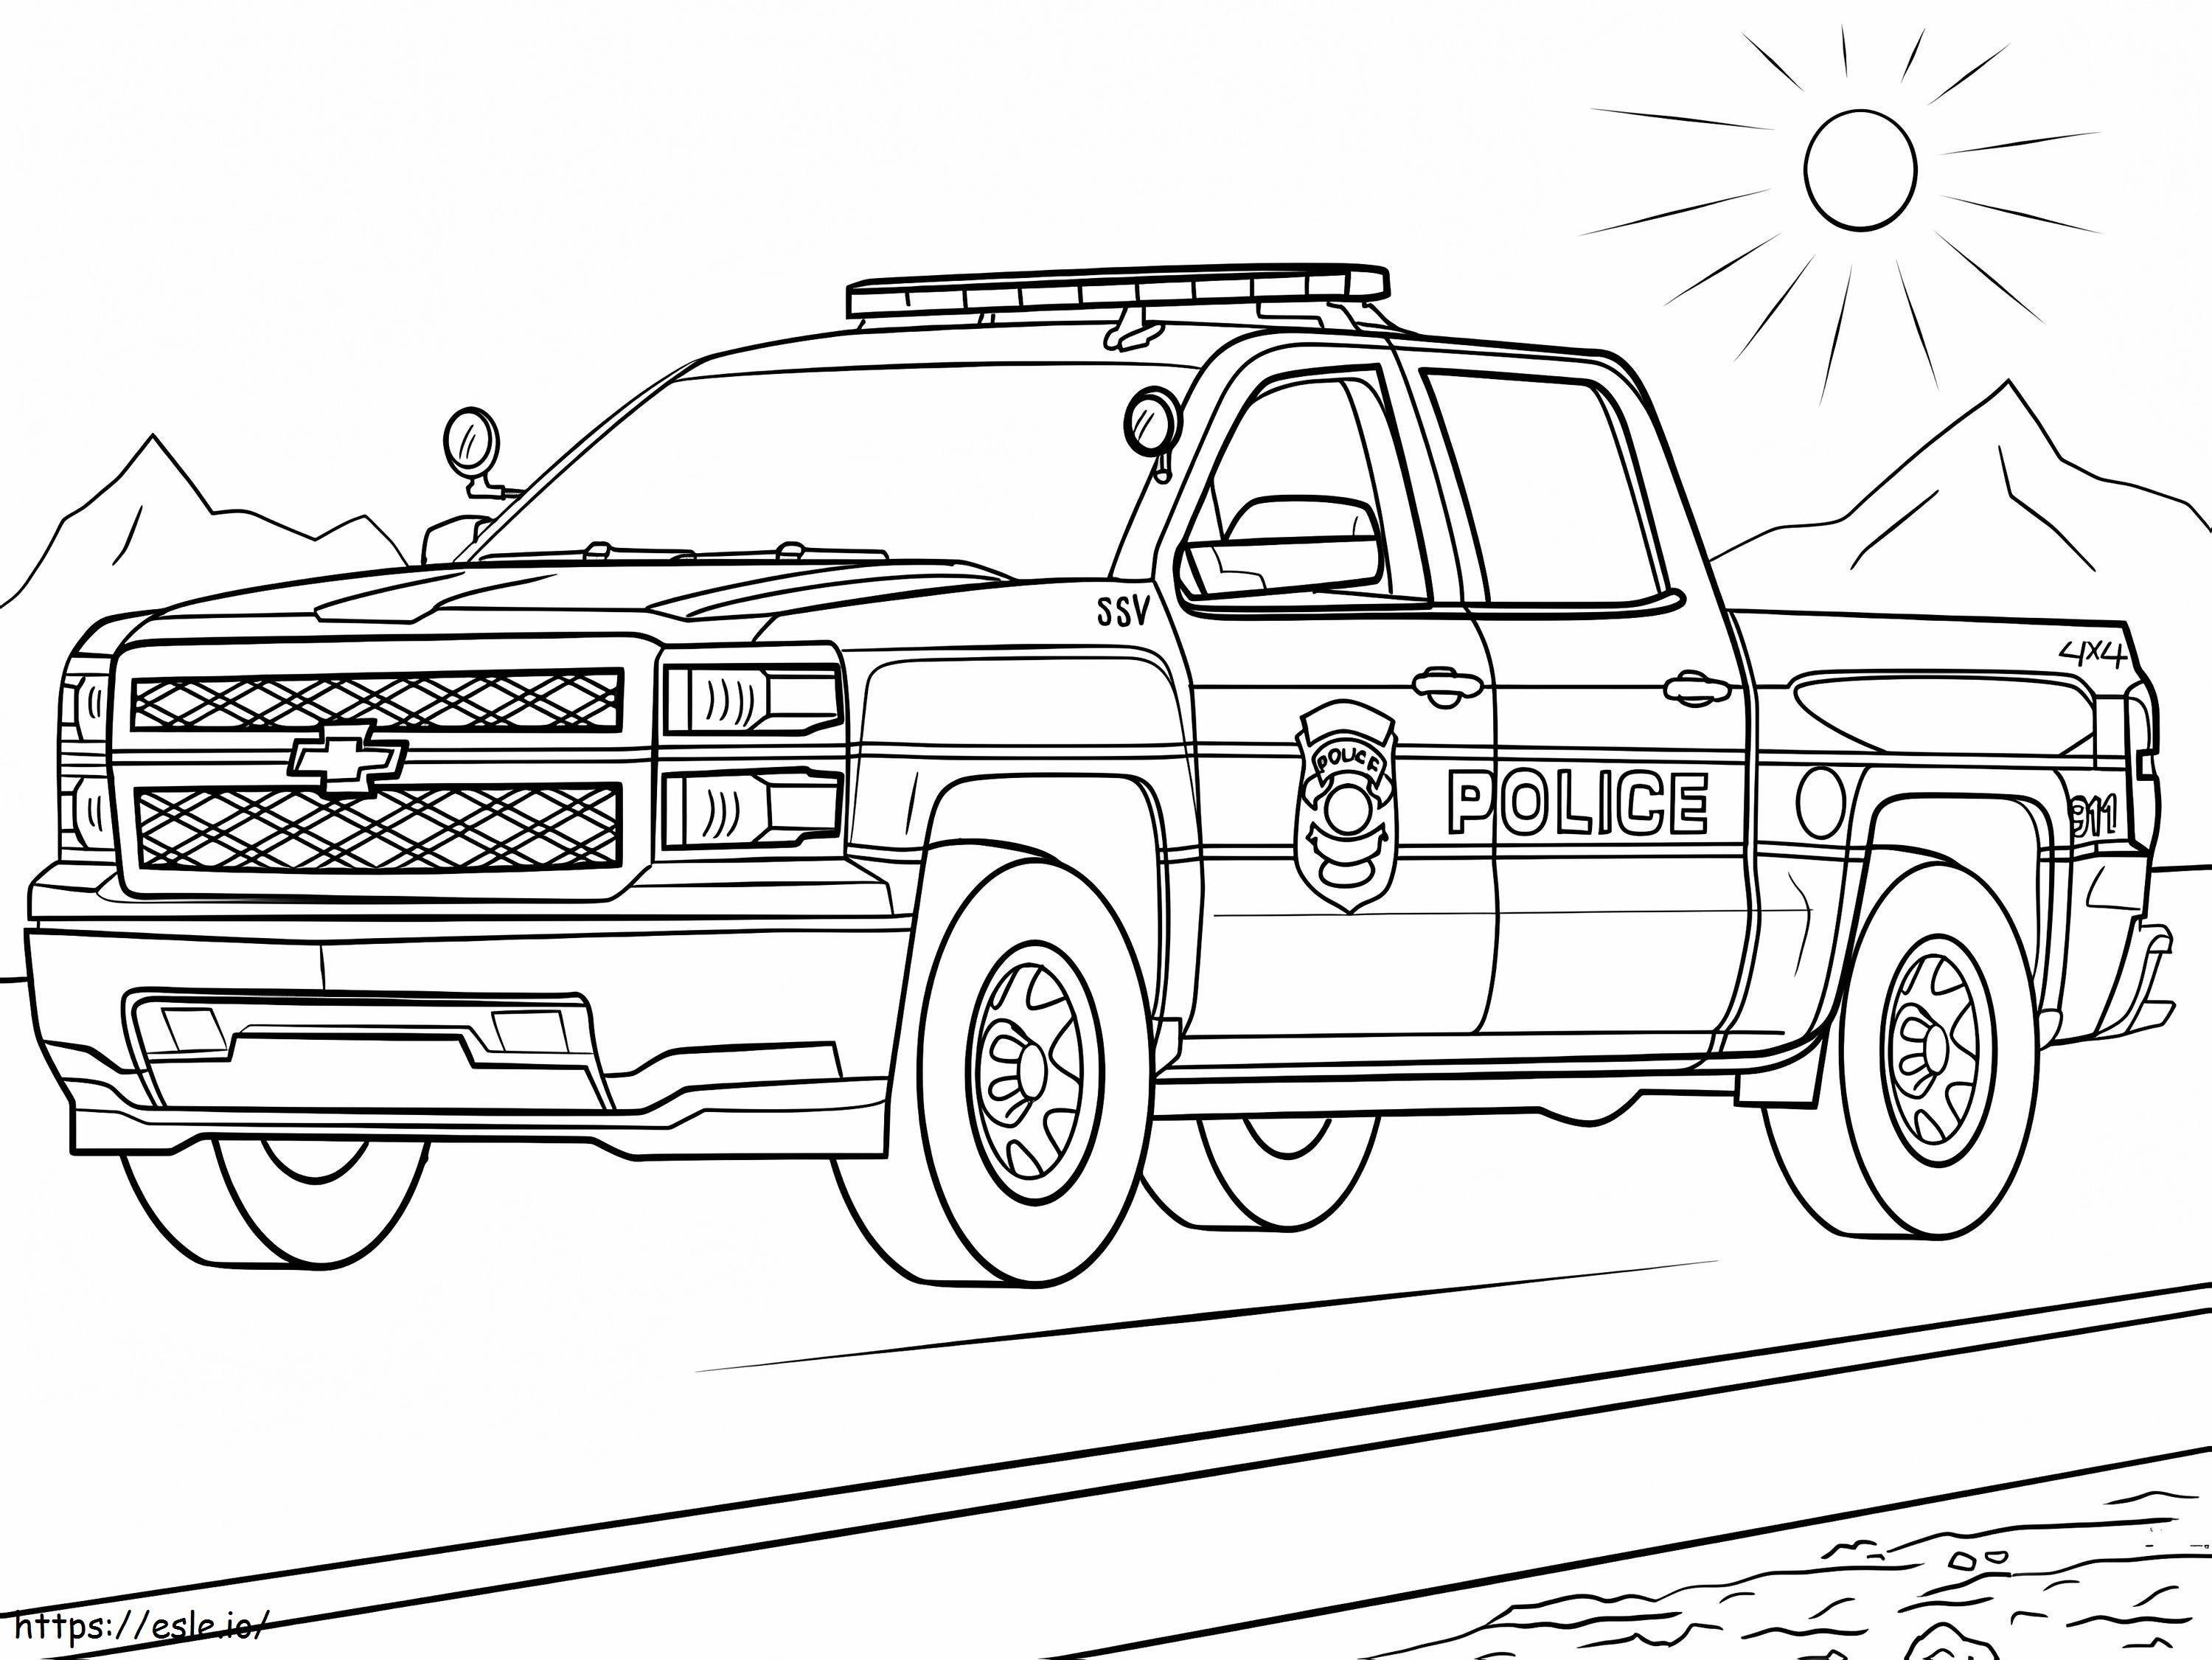 Police Truck Coloring Page coloring page